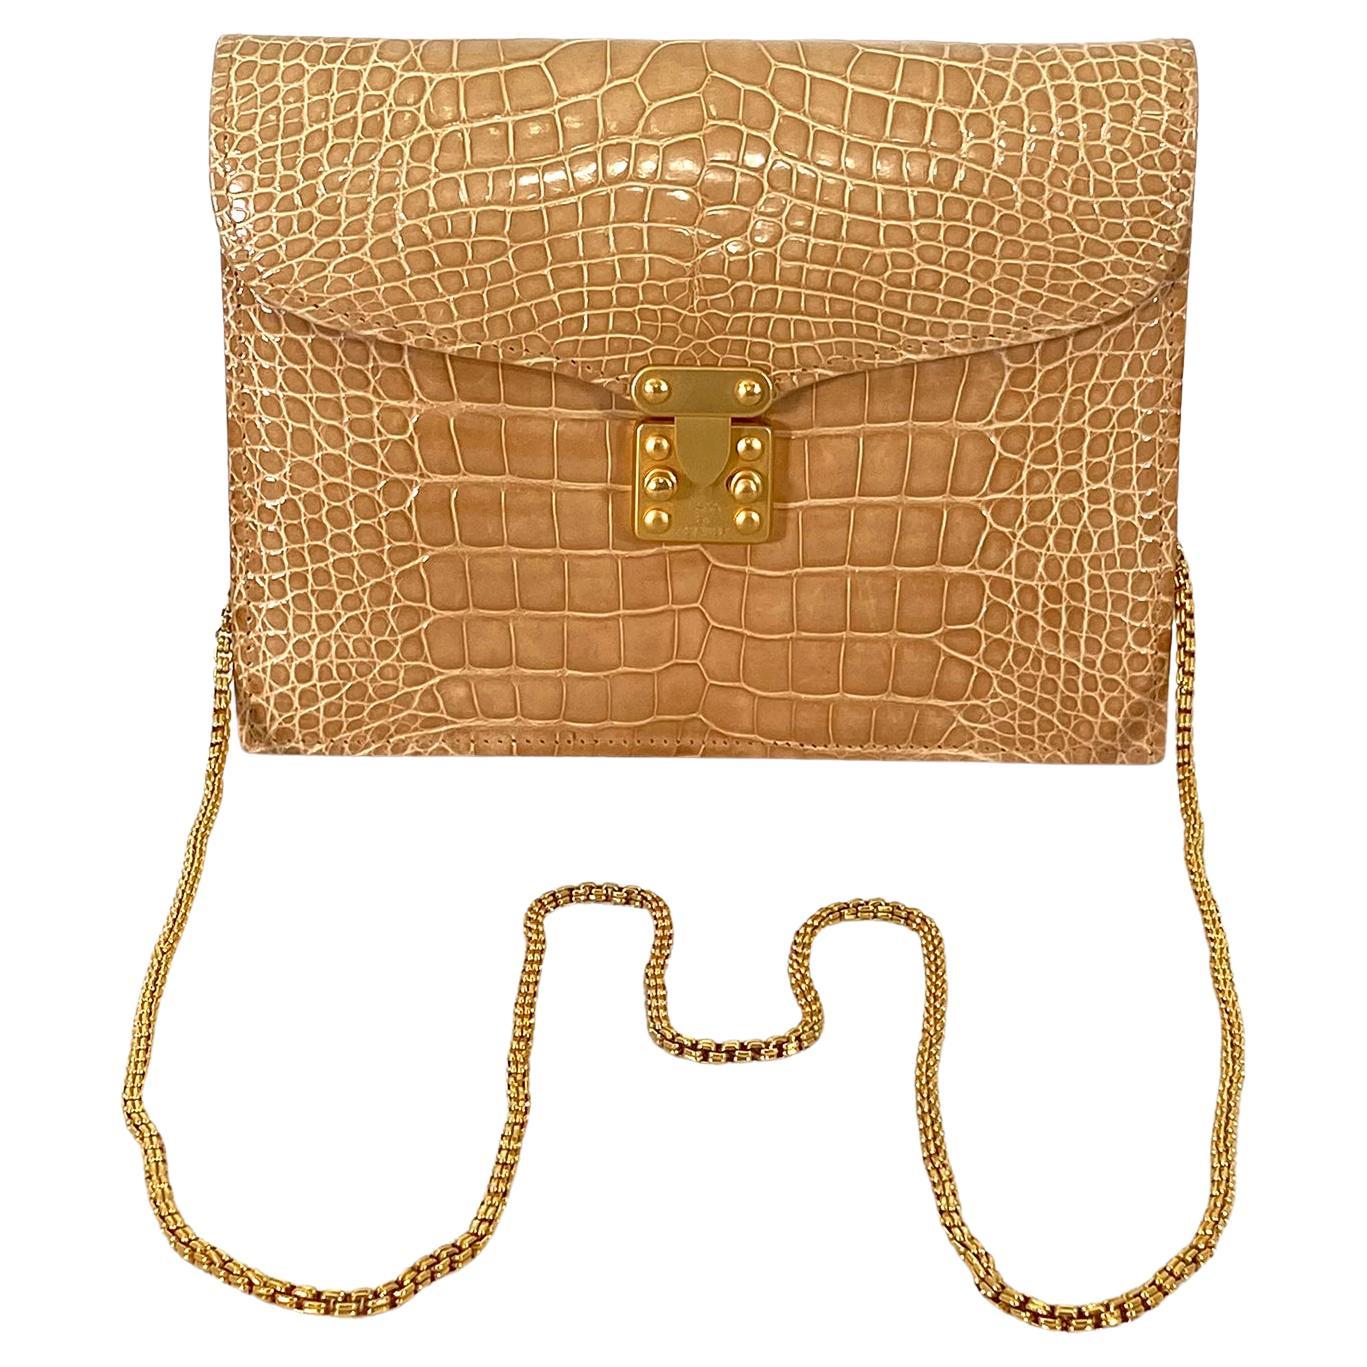 Alexander McQueen Clutch Box 16 Small Red Gold-Tone Hardware Python Skin Leather Cross Body Bag